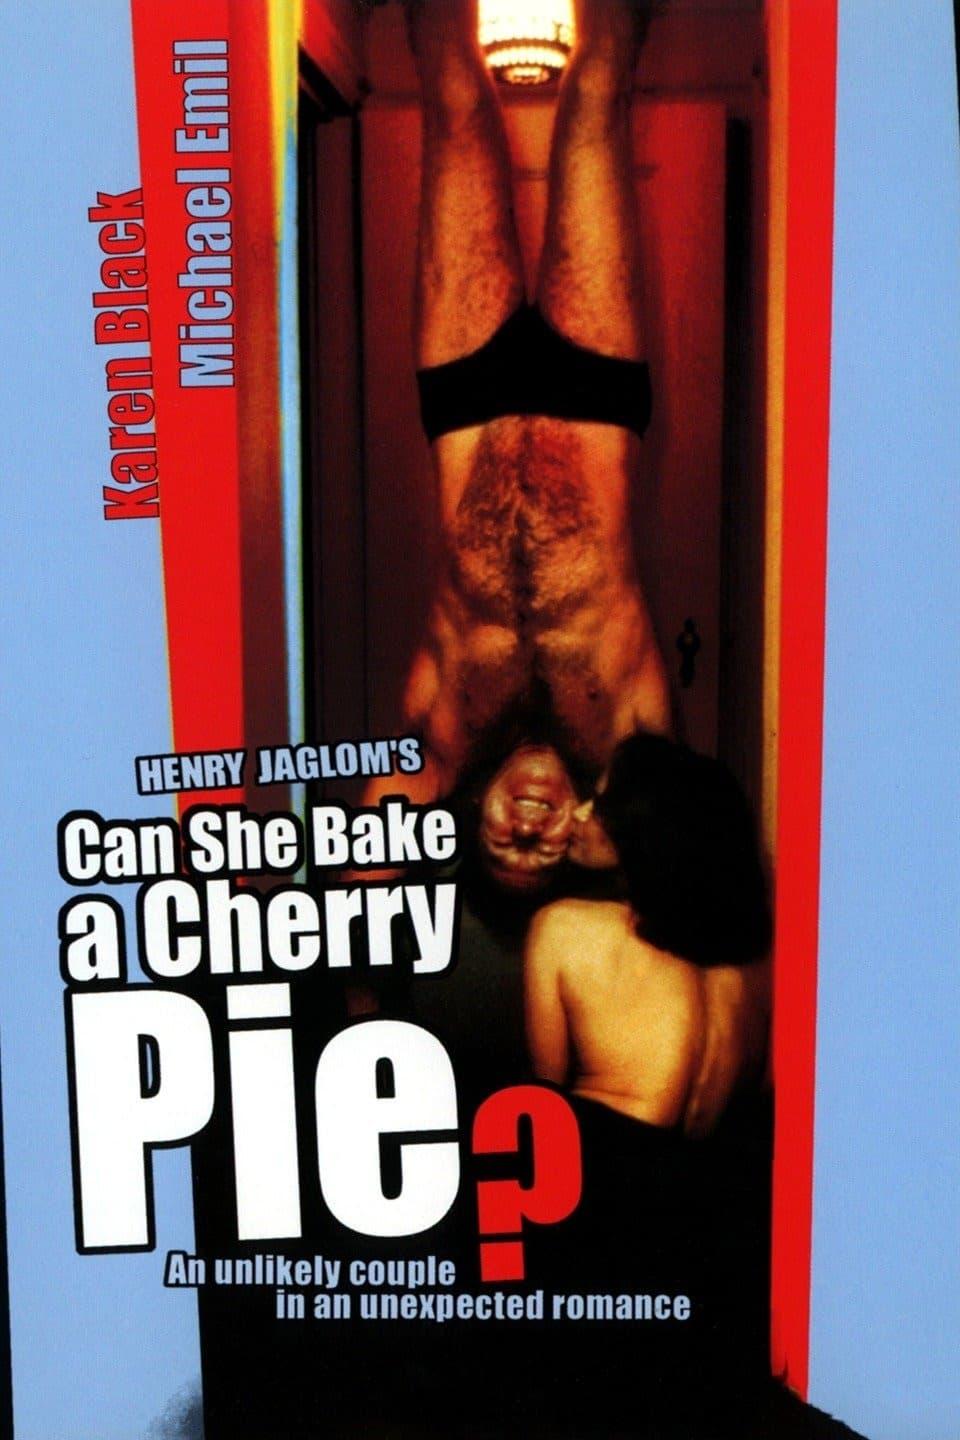 Can She Bake a Cherry Pie? poster